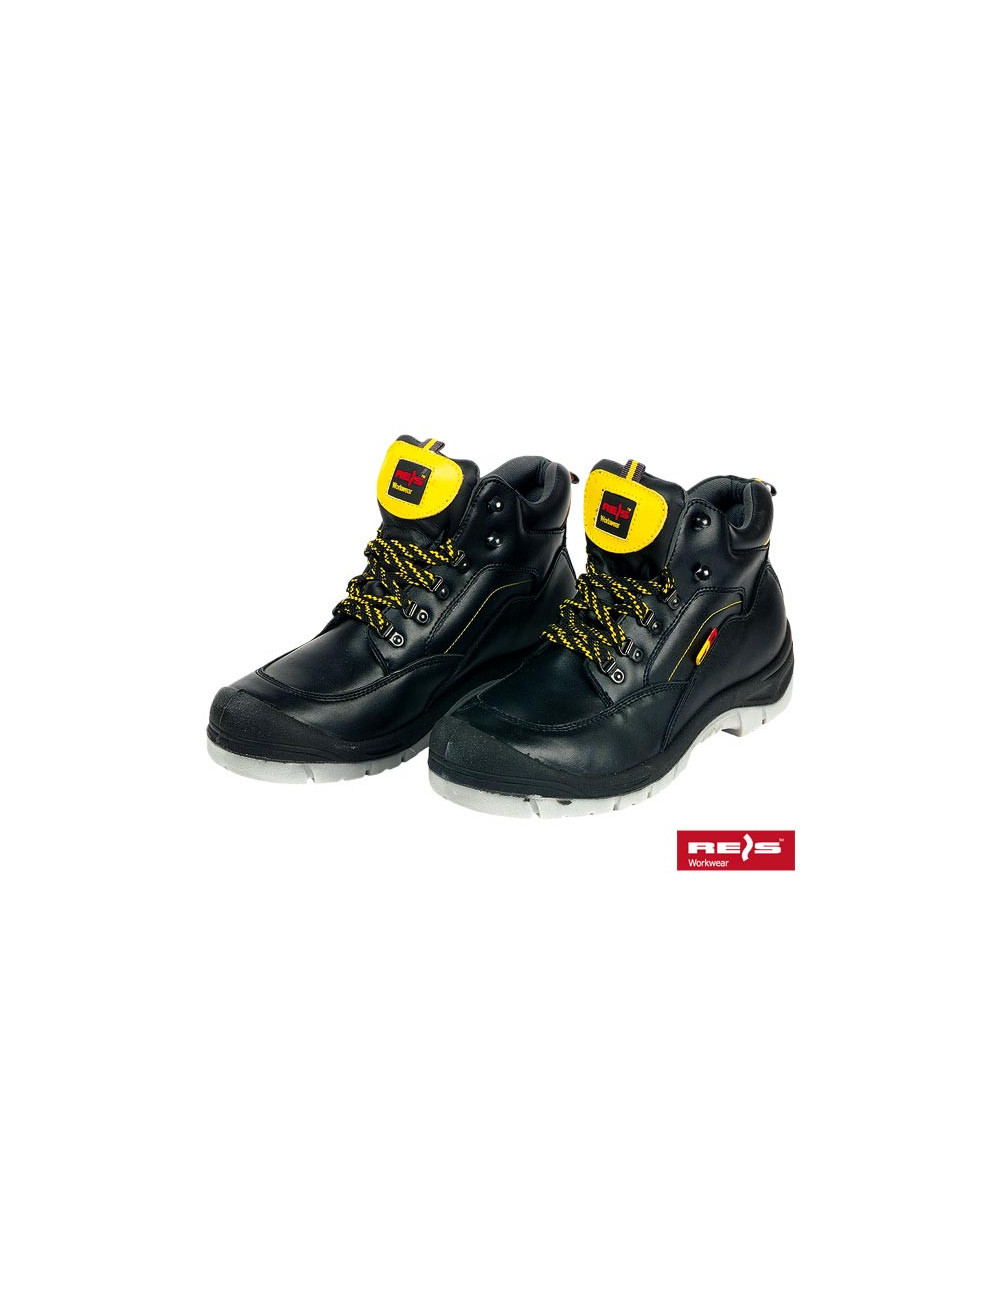 Safety shoes brqan by black-yellow Reis